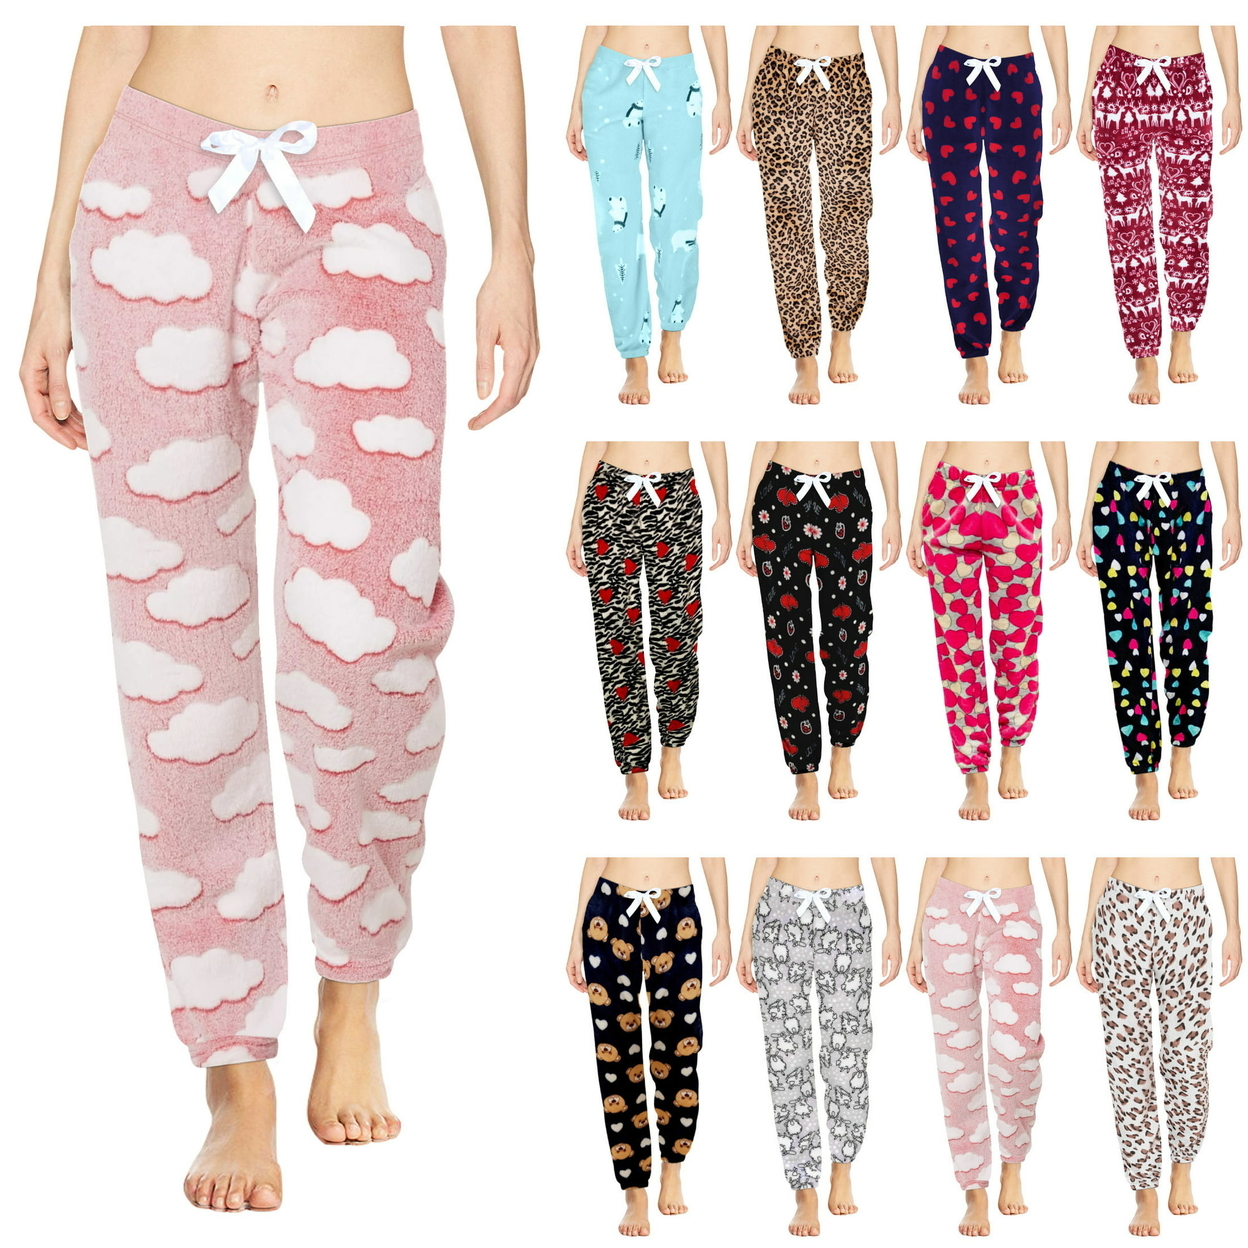 4-Pack: Women's Solid & Printed Ultra-Soft Comfy Stretch Micro-Fleece Pajama Lounge Pants - X-large, Shapes